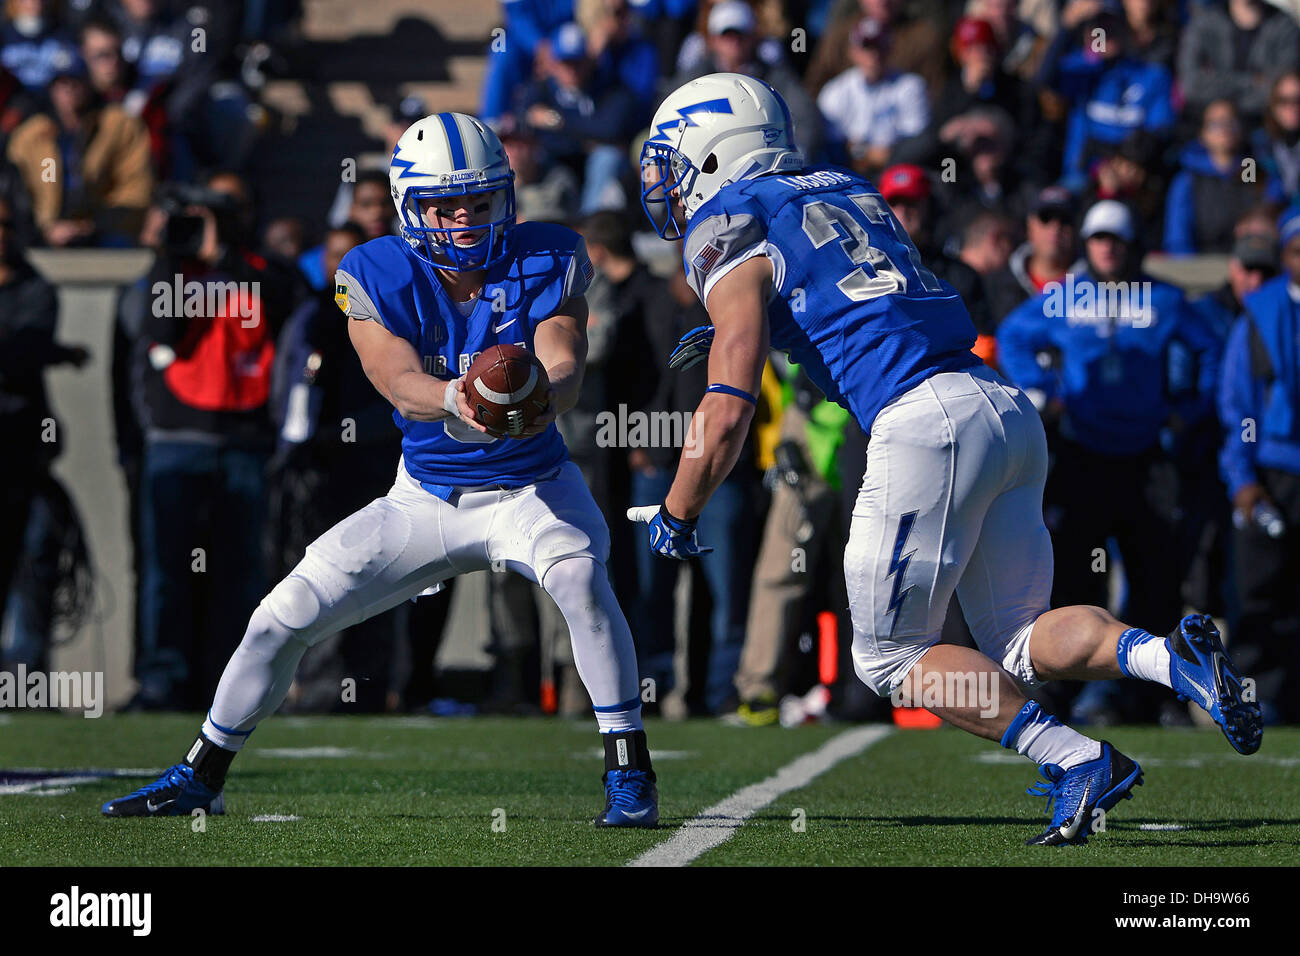 Air Force quarter back Nate Romine, a freshman, hands off the ball to running back Anthony LaCoste, a senior, to rush the ball 73 yards in a run that lead to a Falcon touchdown during the first quarter of the game versus Army at Falcon Stadium in Colorado Stock Photo